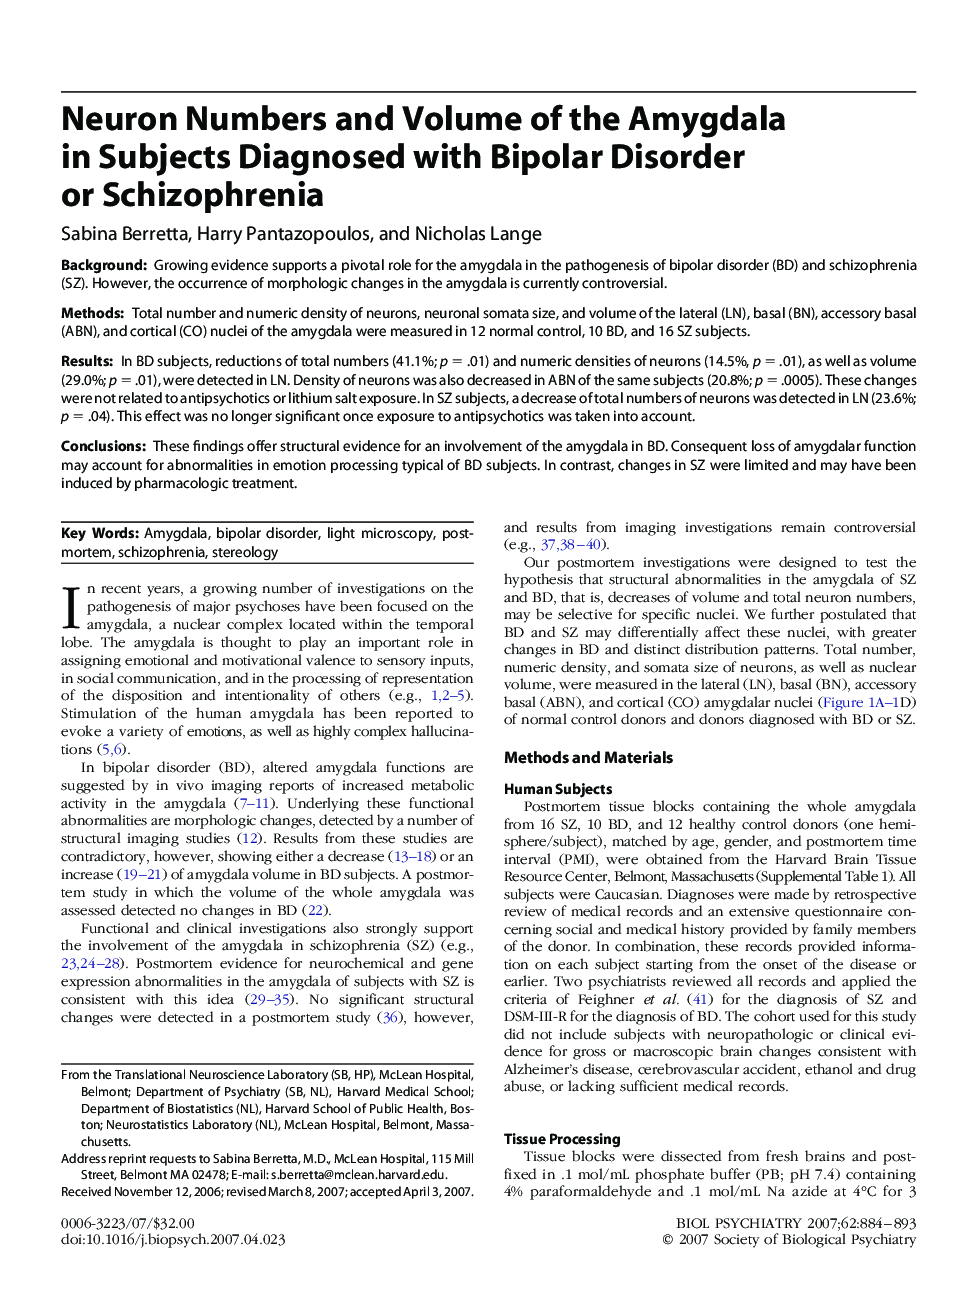 Neuron Numbers and Volume of the Amygdala in Subjects Diagnosed with Bipolar Disorder or Schizophrenia